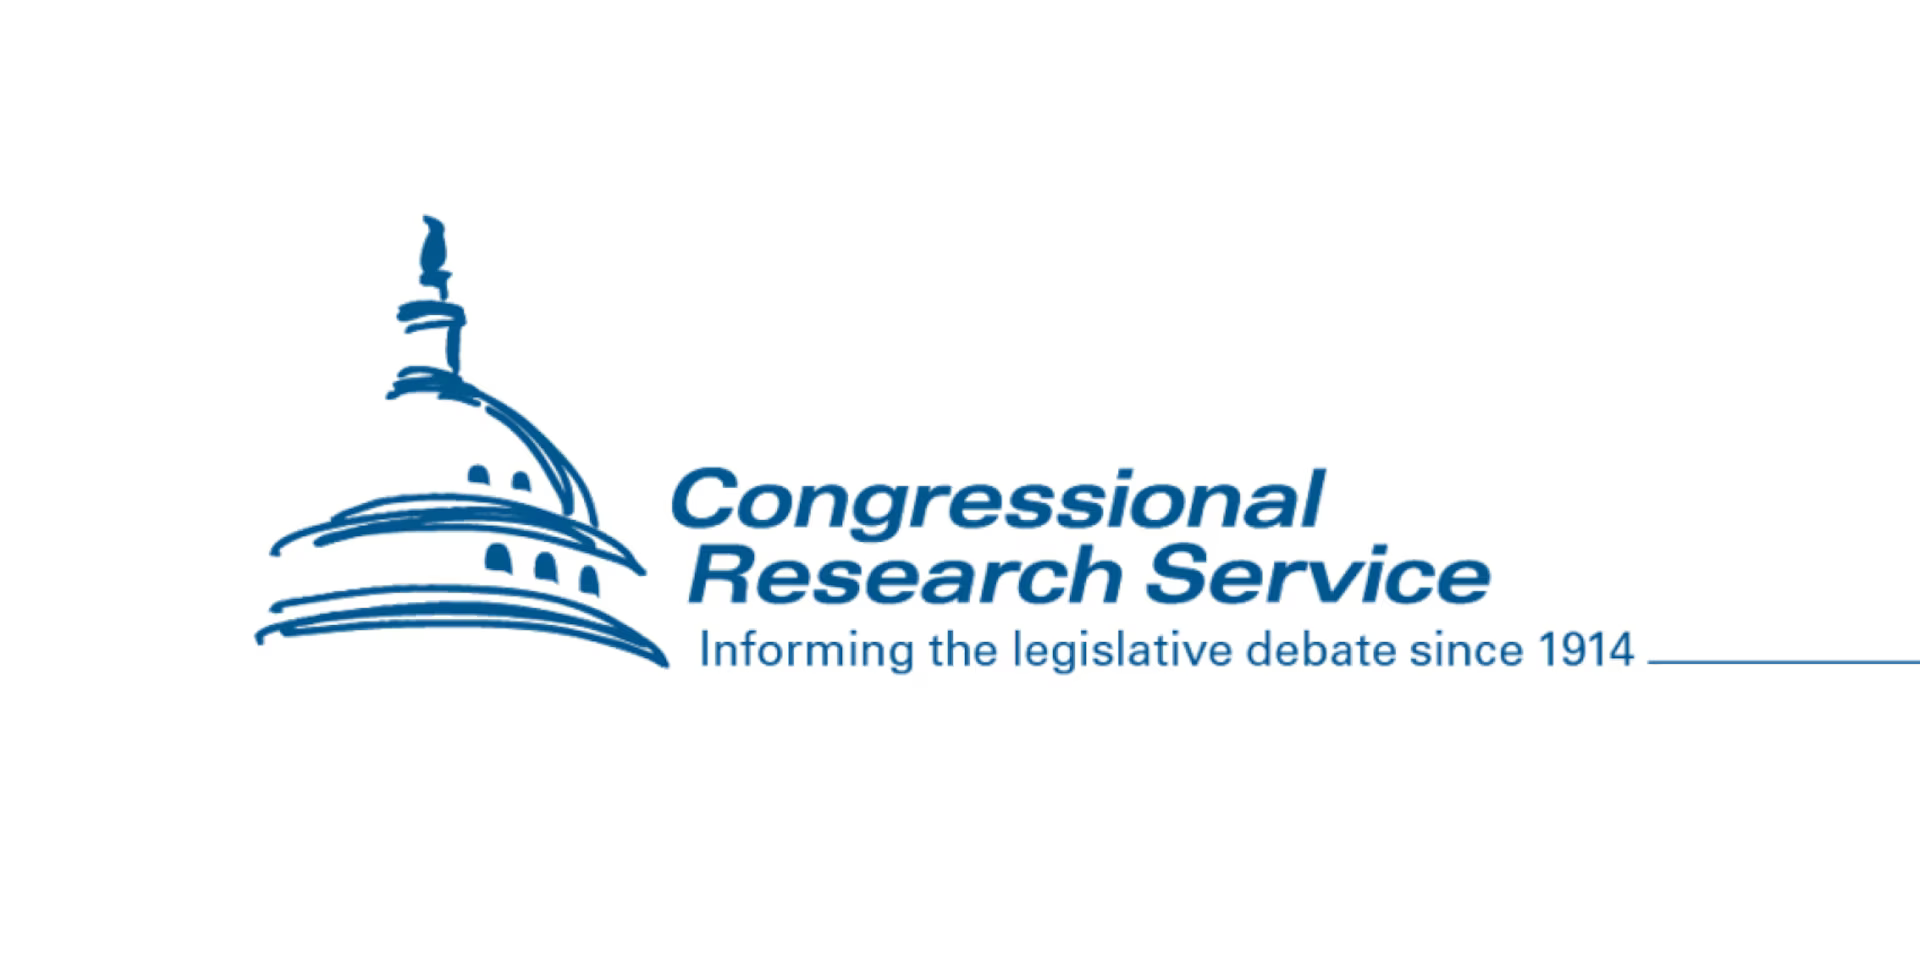 About congressional research service